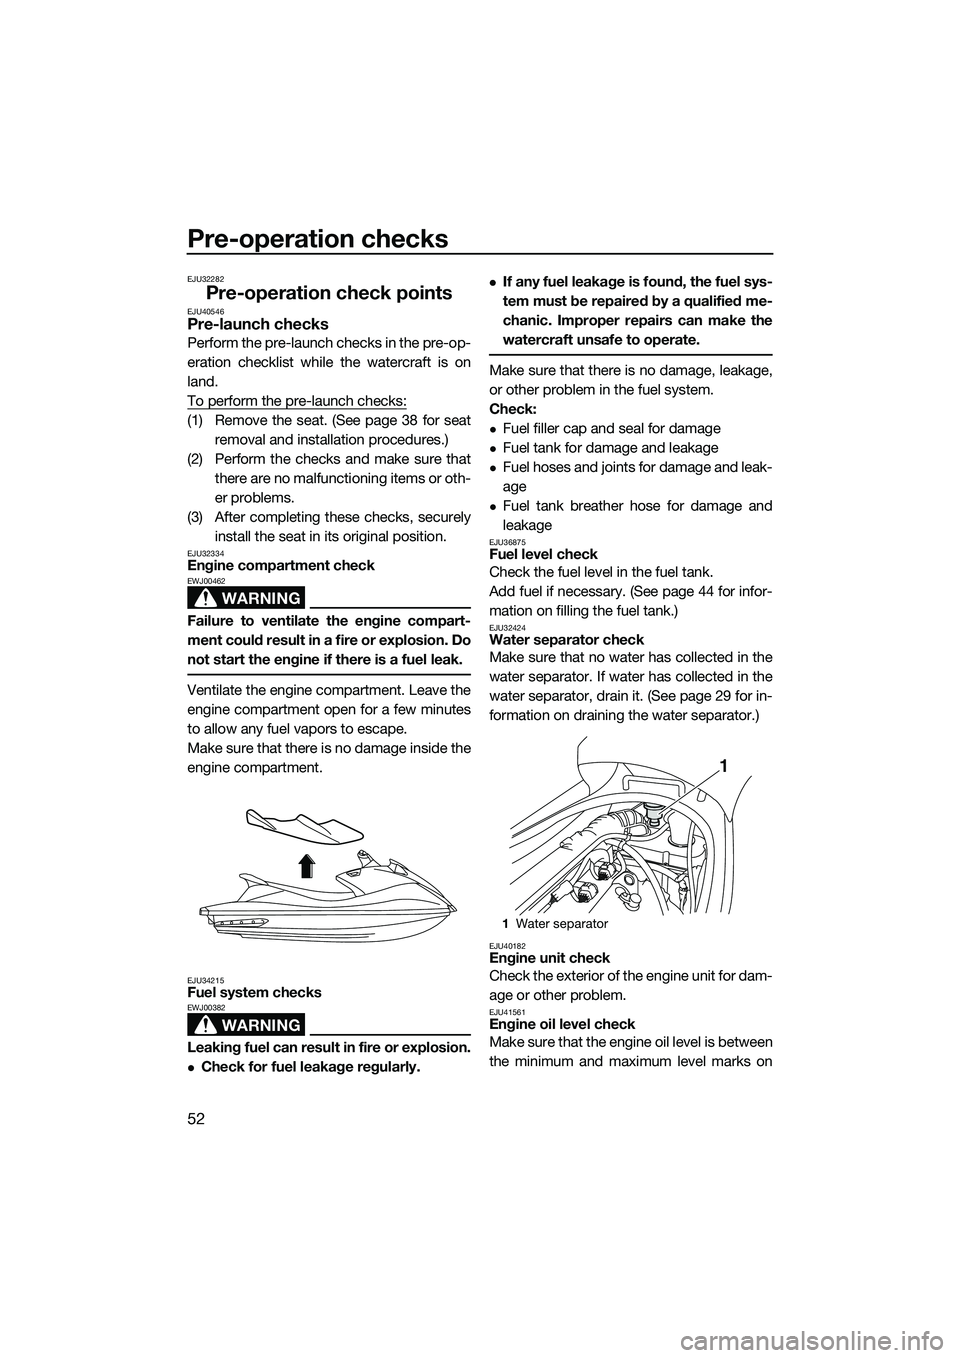 YAMAHA VX CRUISER 2014  Owners Manual Pre-operation checks
52
EJU32282
Pre-operation check pointsEJU40546Pre-launch checks
Perform the pre-launch checks in the pre-op-
eration checklist while the watercraft is on
land.
To perform the pre-